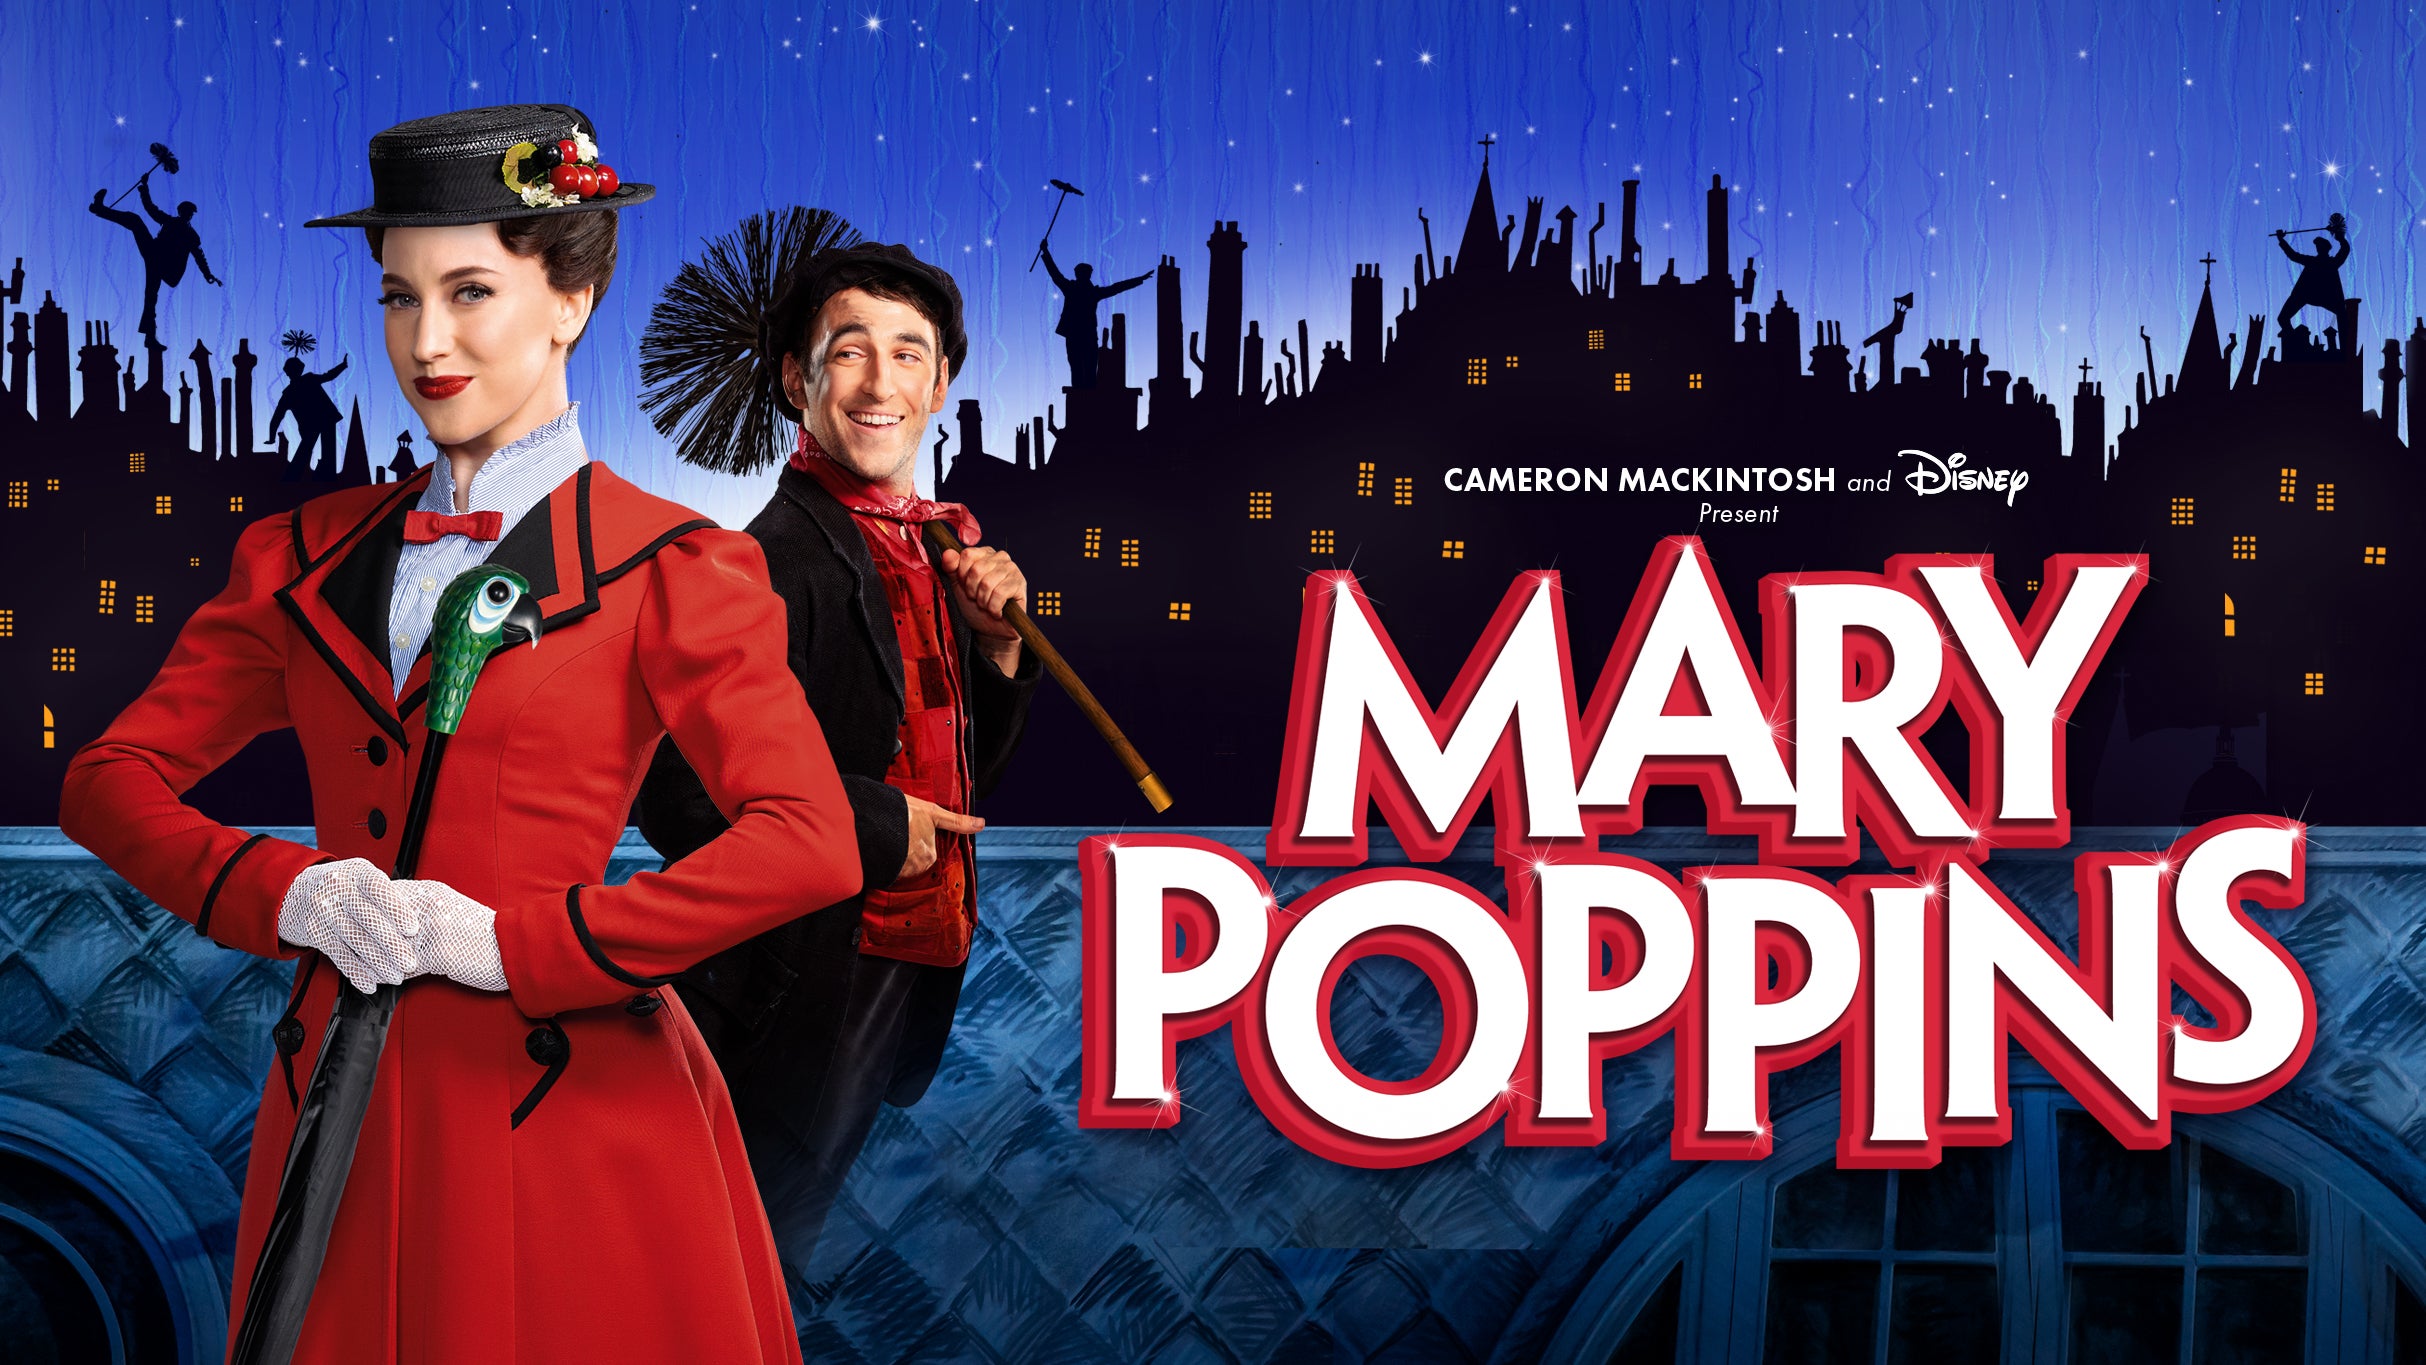 Mary Poppins - Captioned Performance in Dublin promo photo for Mary Poppins Priority presale offer code